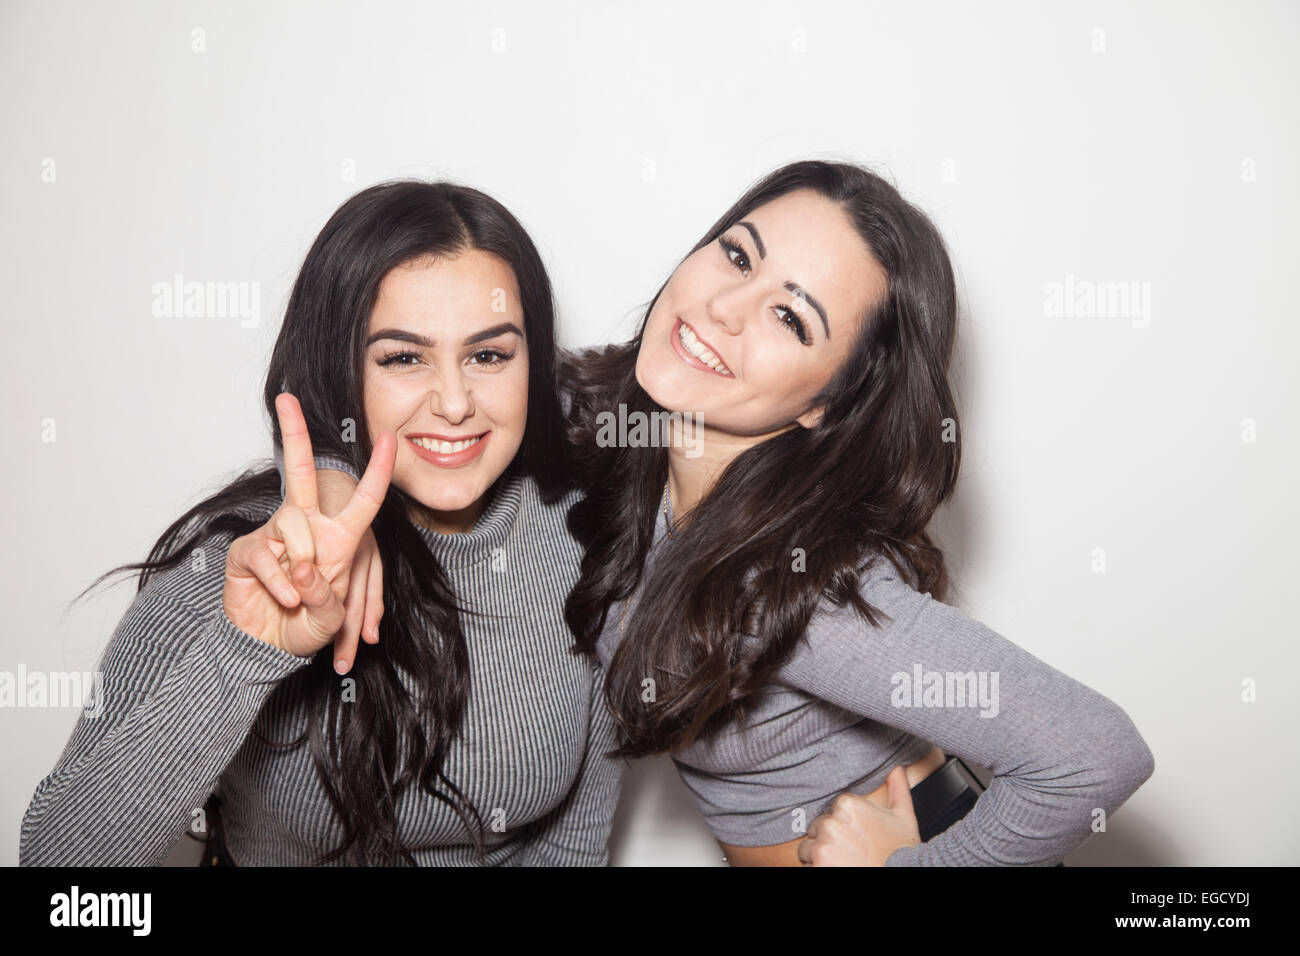 Two sisters close together having fun. Stock Photo